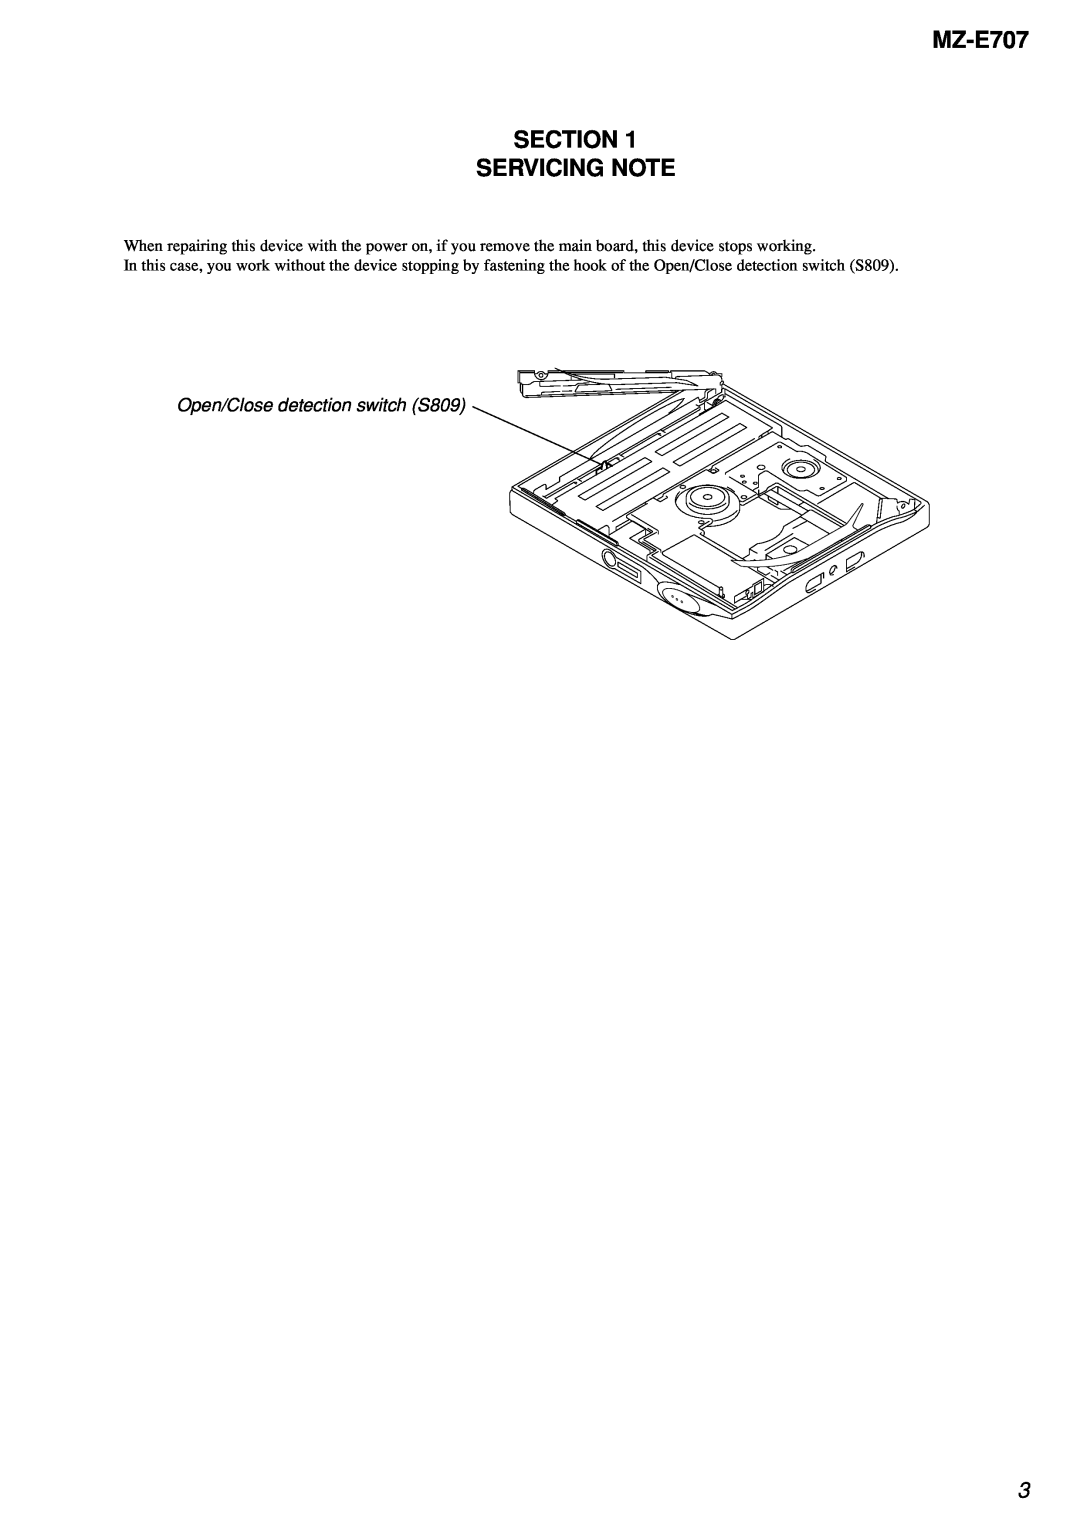 Sony service manual MZ-E707 SECTION SERVICING NOTE, Open/Close detection switch S809 